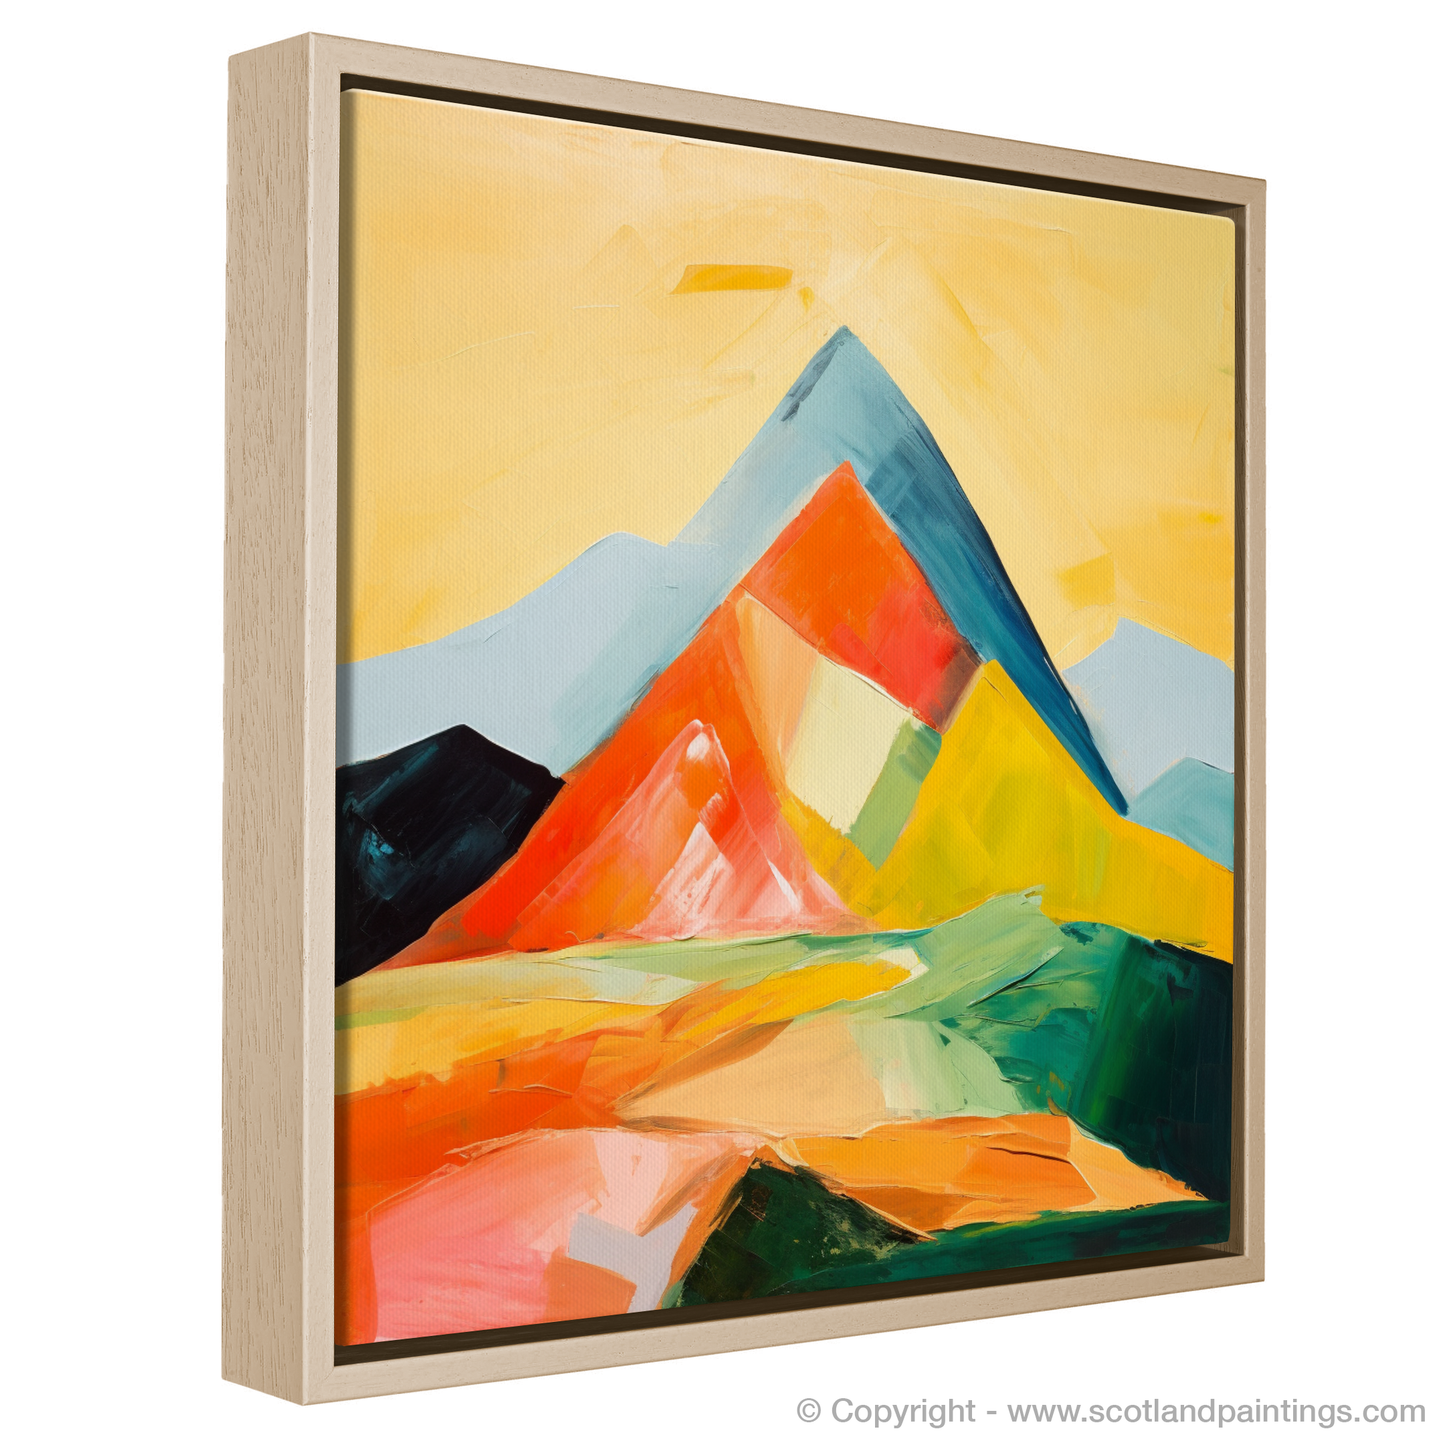 Painting and Art Print of Mount Keen entitled "Abstract Highland Majesty: A Mount Keen Inspiration".